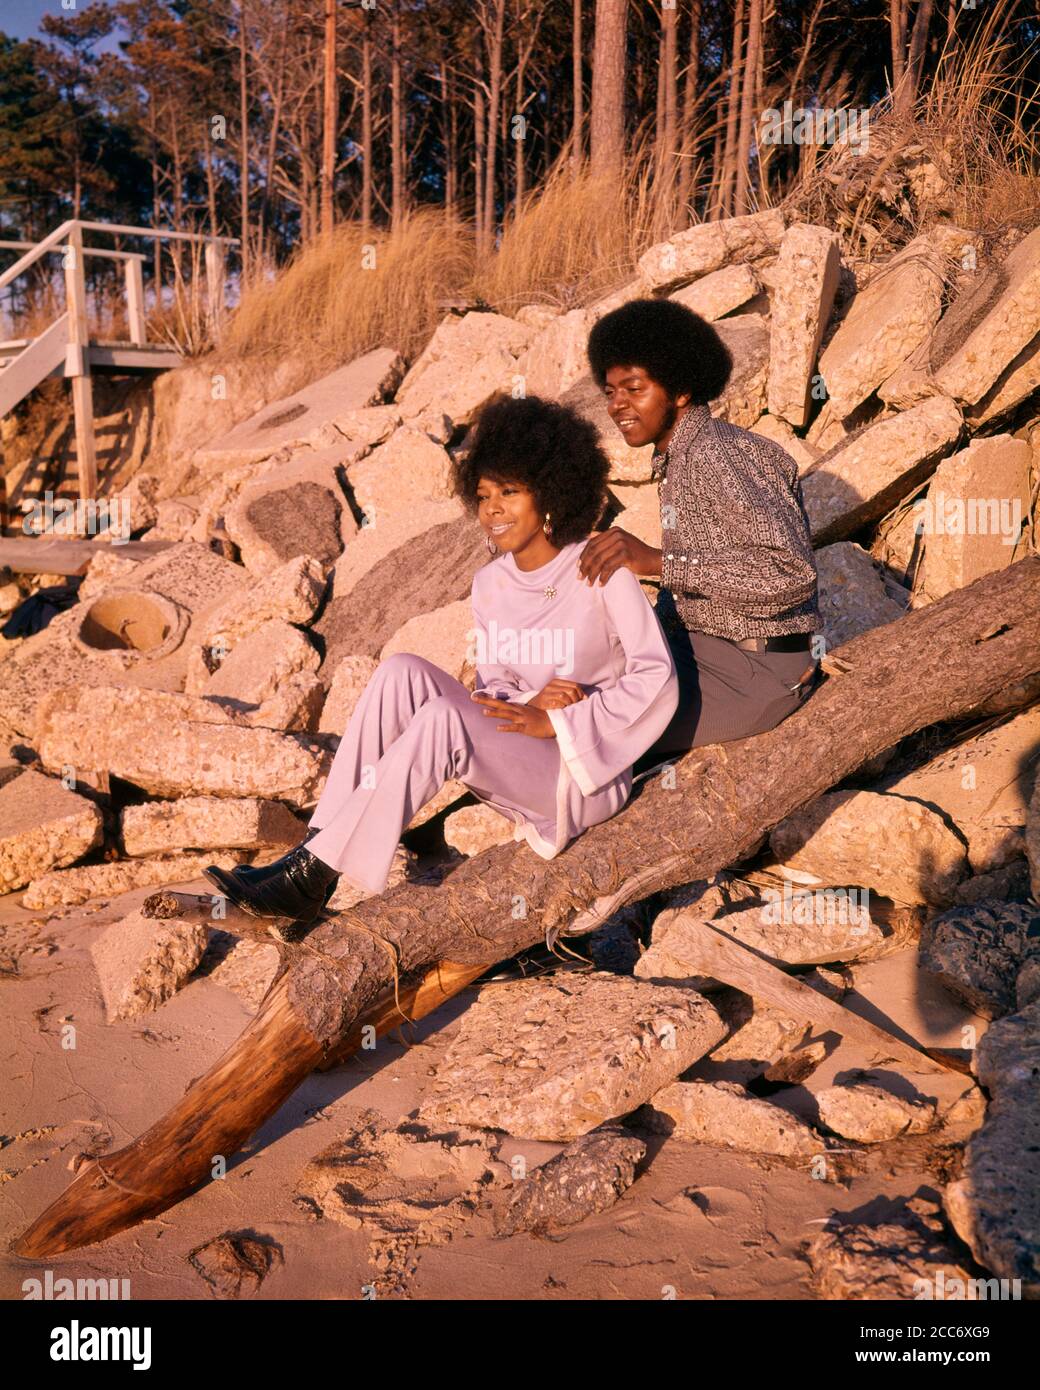 1970s ROMANTIC AFRICAN-AMERICAN COUPLE WATCHING SUNSET ON ROCKY BEACH FASHION CLOTHES AND HAIRSTYLES  - ks9161 CRS001 HARS FEMALES MARRIED RURAL SPOUSE HUSBANDS HEALTHINESS HOME LIFE COPY SPACE FRIENDSHIP HALF-LENGTH LADIES PERSONS INSPIRATION AFRO CARING MALES CONFIDENCE PARTNER DATING SHORE DREAMS ROCKY HAPPINESS DISCOVERY LEISURE AFRICAN-AMERICANS AFRICAN-AMERICAN AND HAIRSTYLE BLACK ETHNICITY ATTRACTION BEACHES CONNECTION COURTSHIP FRO HAIRSTYLES SANDY STYLISH PERSONAL ATTACHMENT POSSIBILITY AFFECTION EMOTION RELAXATION SOCIAL ACTIVITY TOGETHERNESS WIVES YOUNG ADULT MAN YOUNG ADULT WOMAN Stock Photo